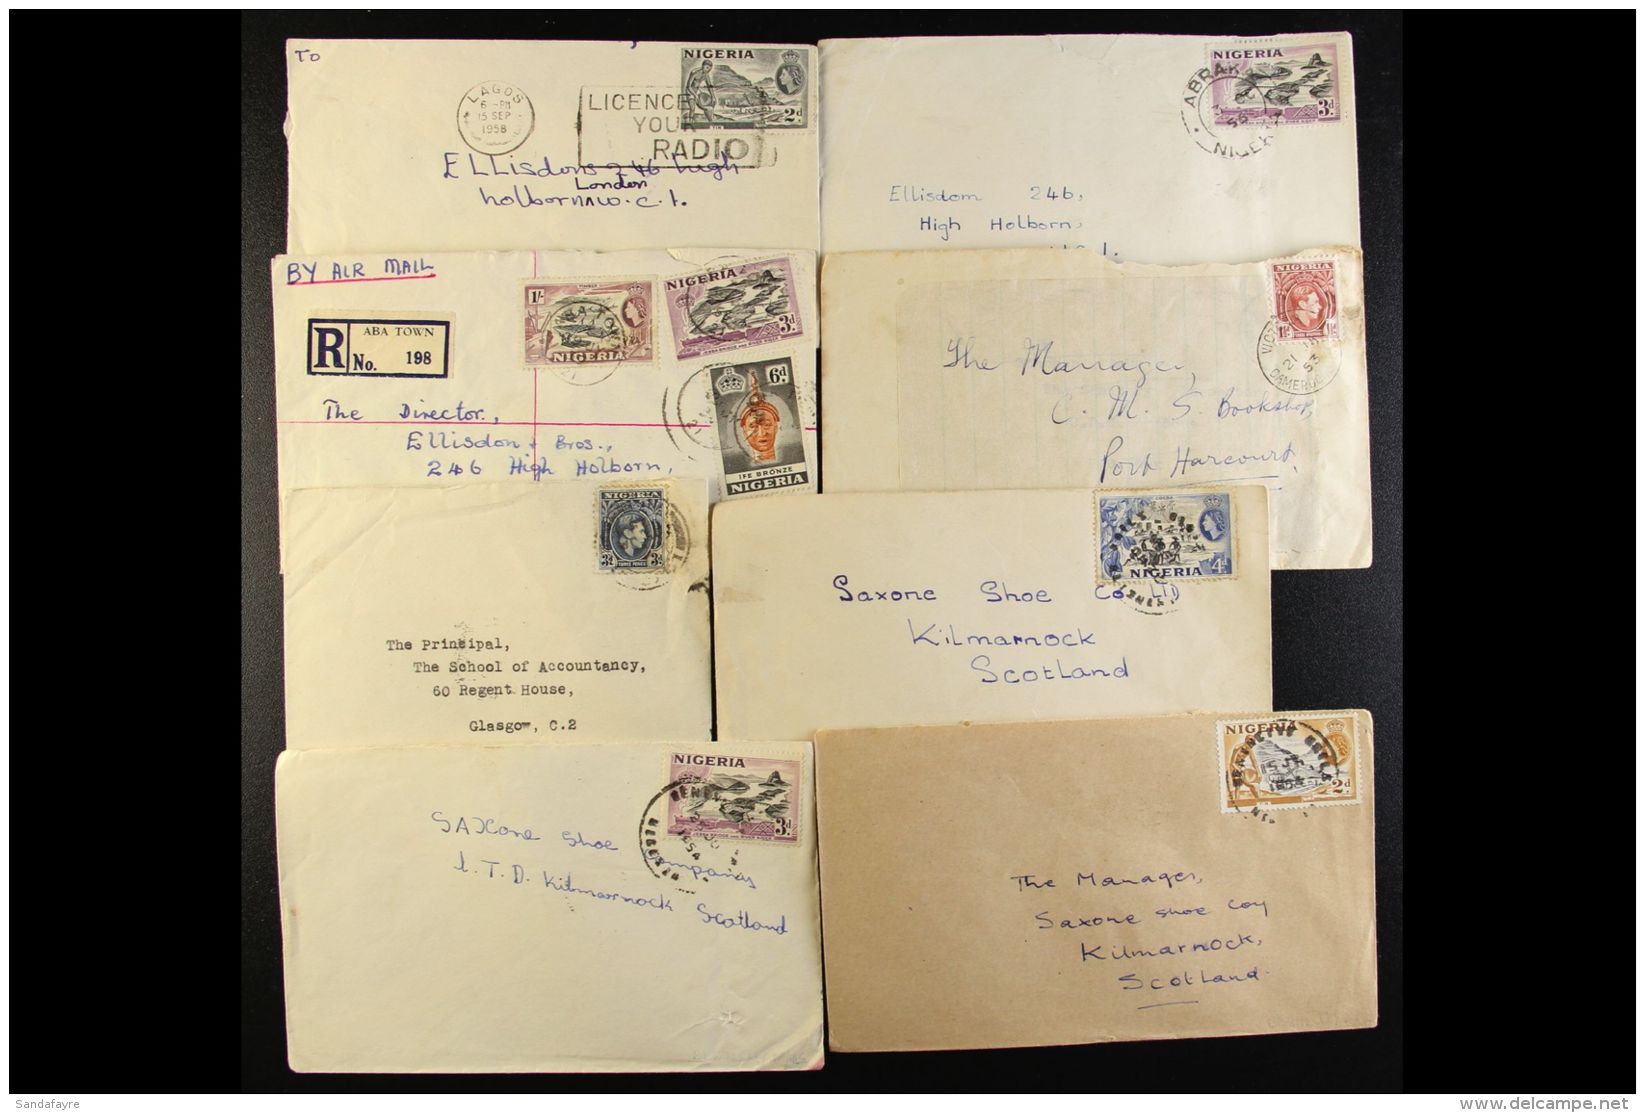 1940's - 1950's COVERS. A Group Of Covers From A Wide Range Of Different Post Offices Chiefly To London But Also... - Nigeria (...-1960)